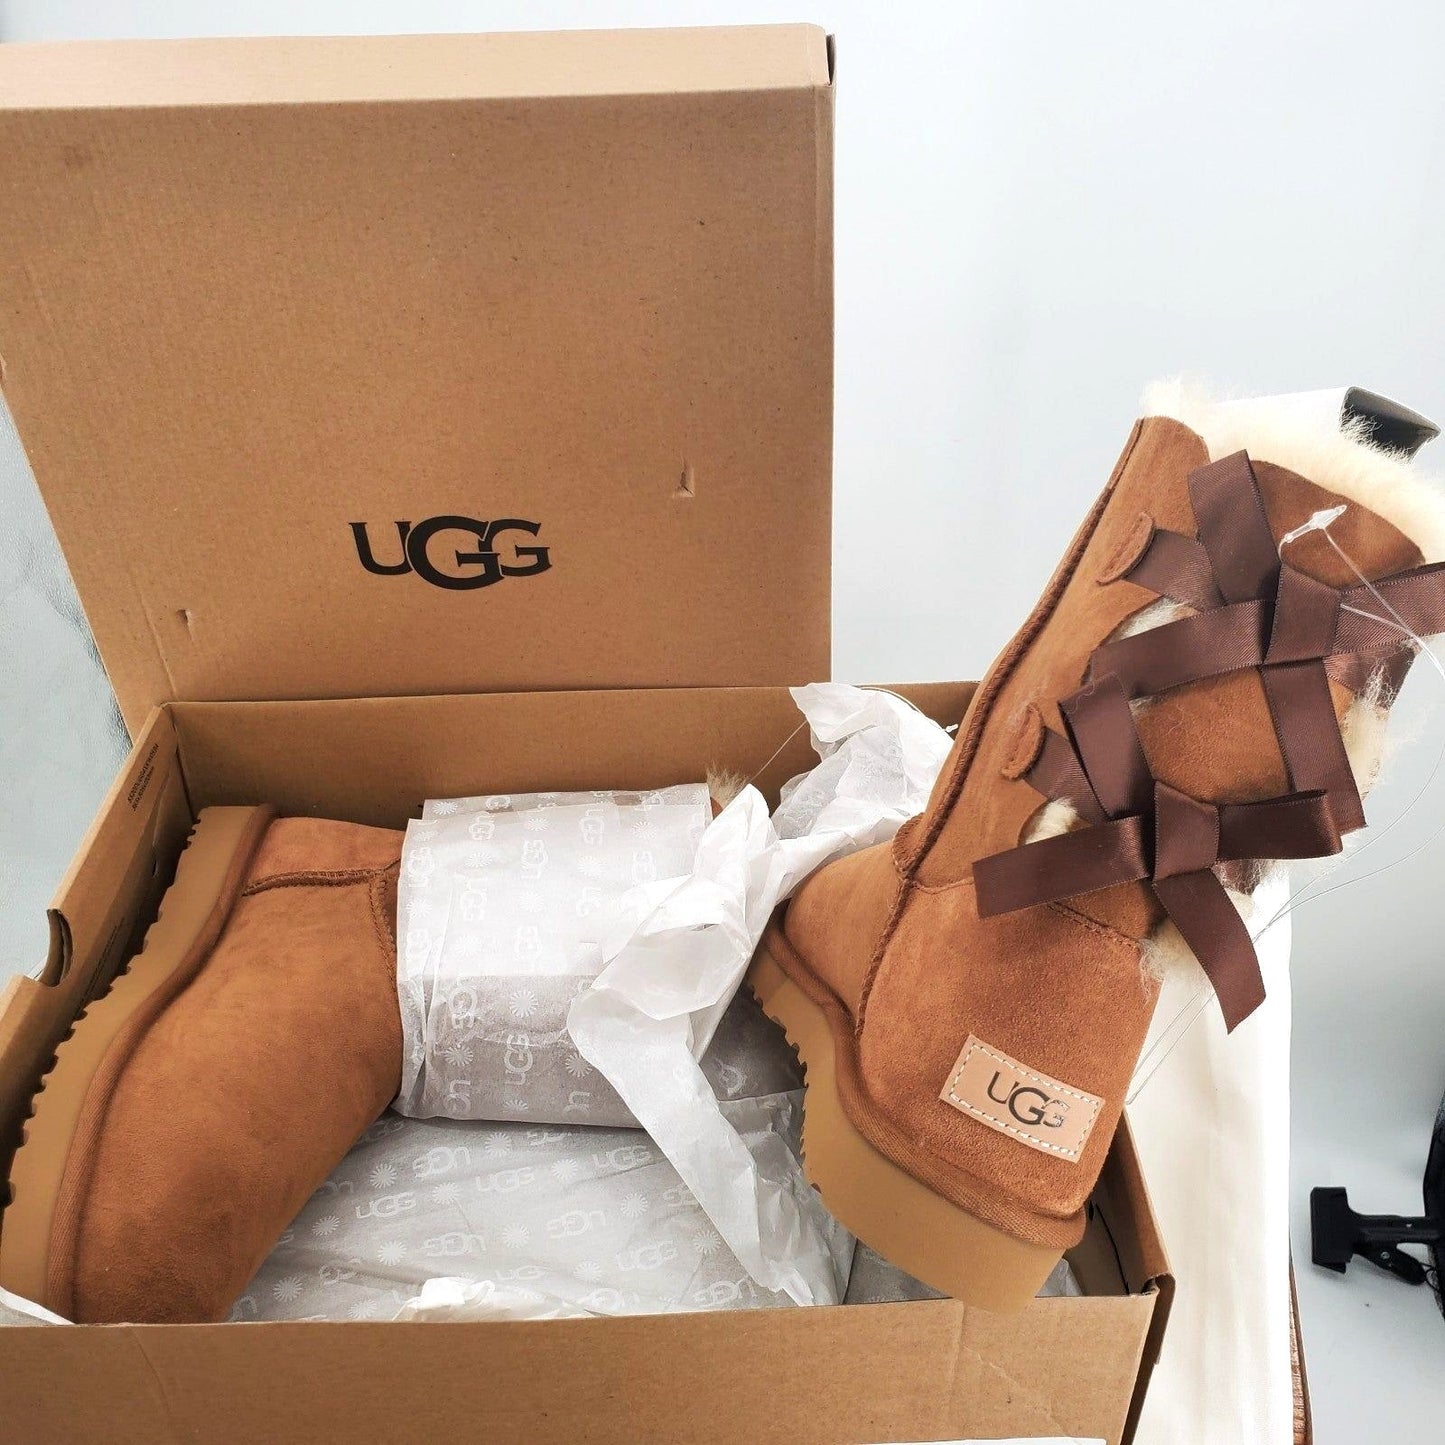 UGG Boots Woman's BAILEY BOW II Chestnut Fur Sheepskin Suede Winter Shoes Snow